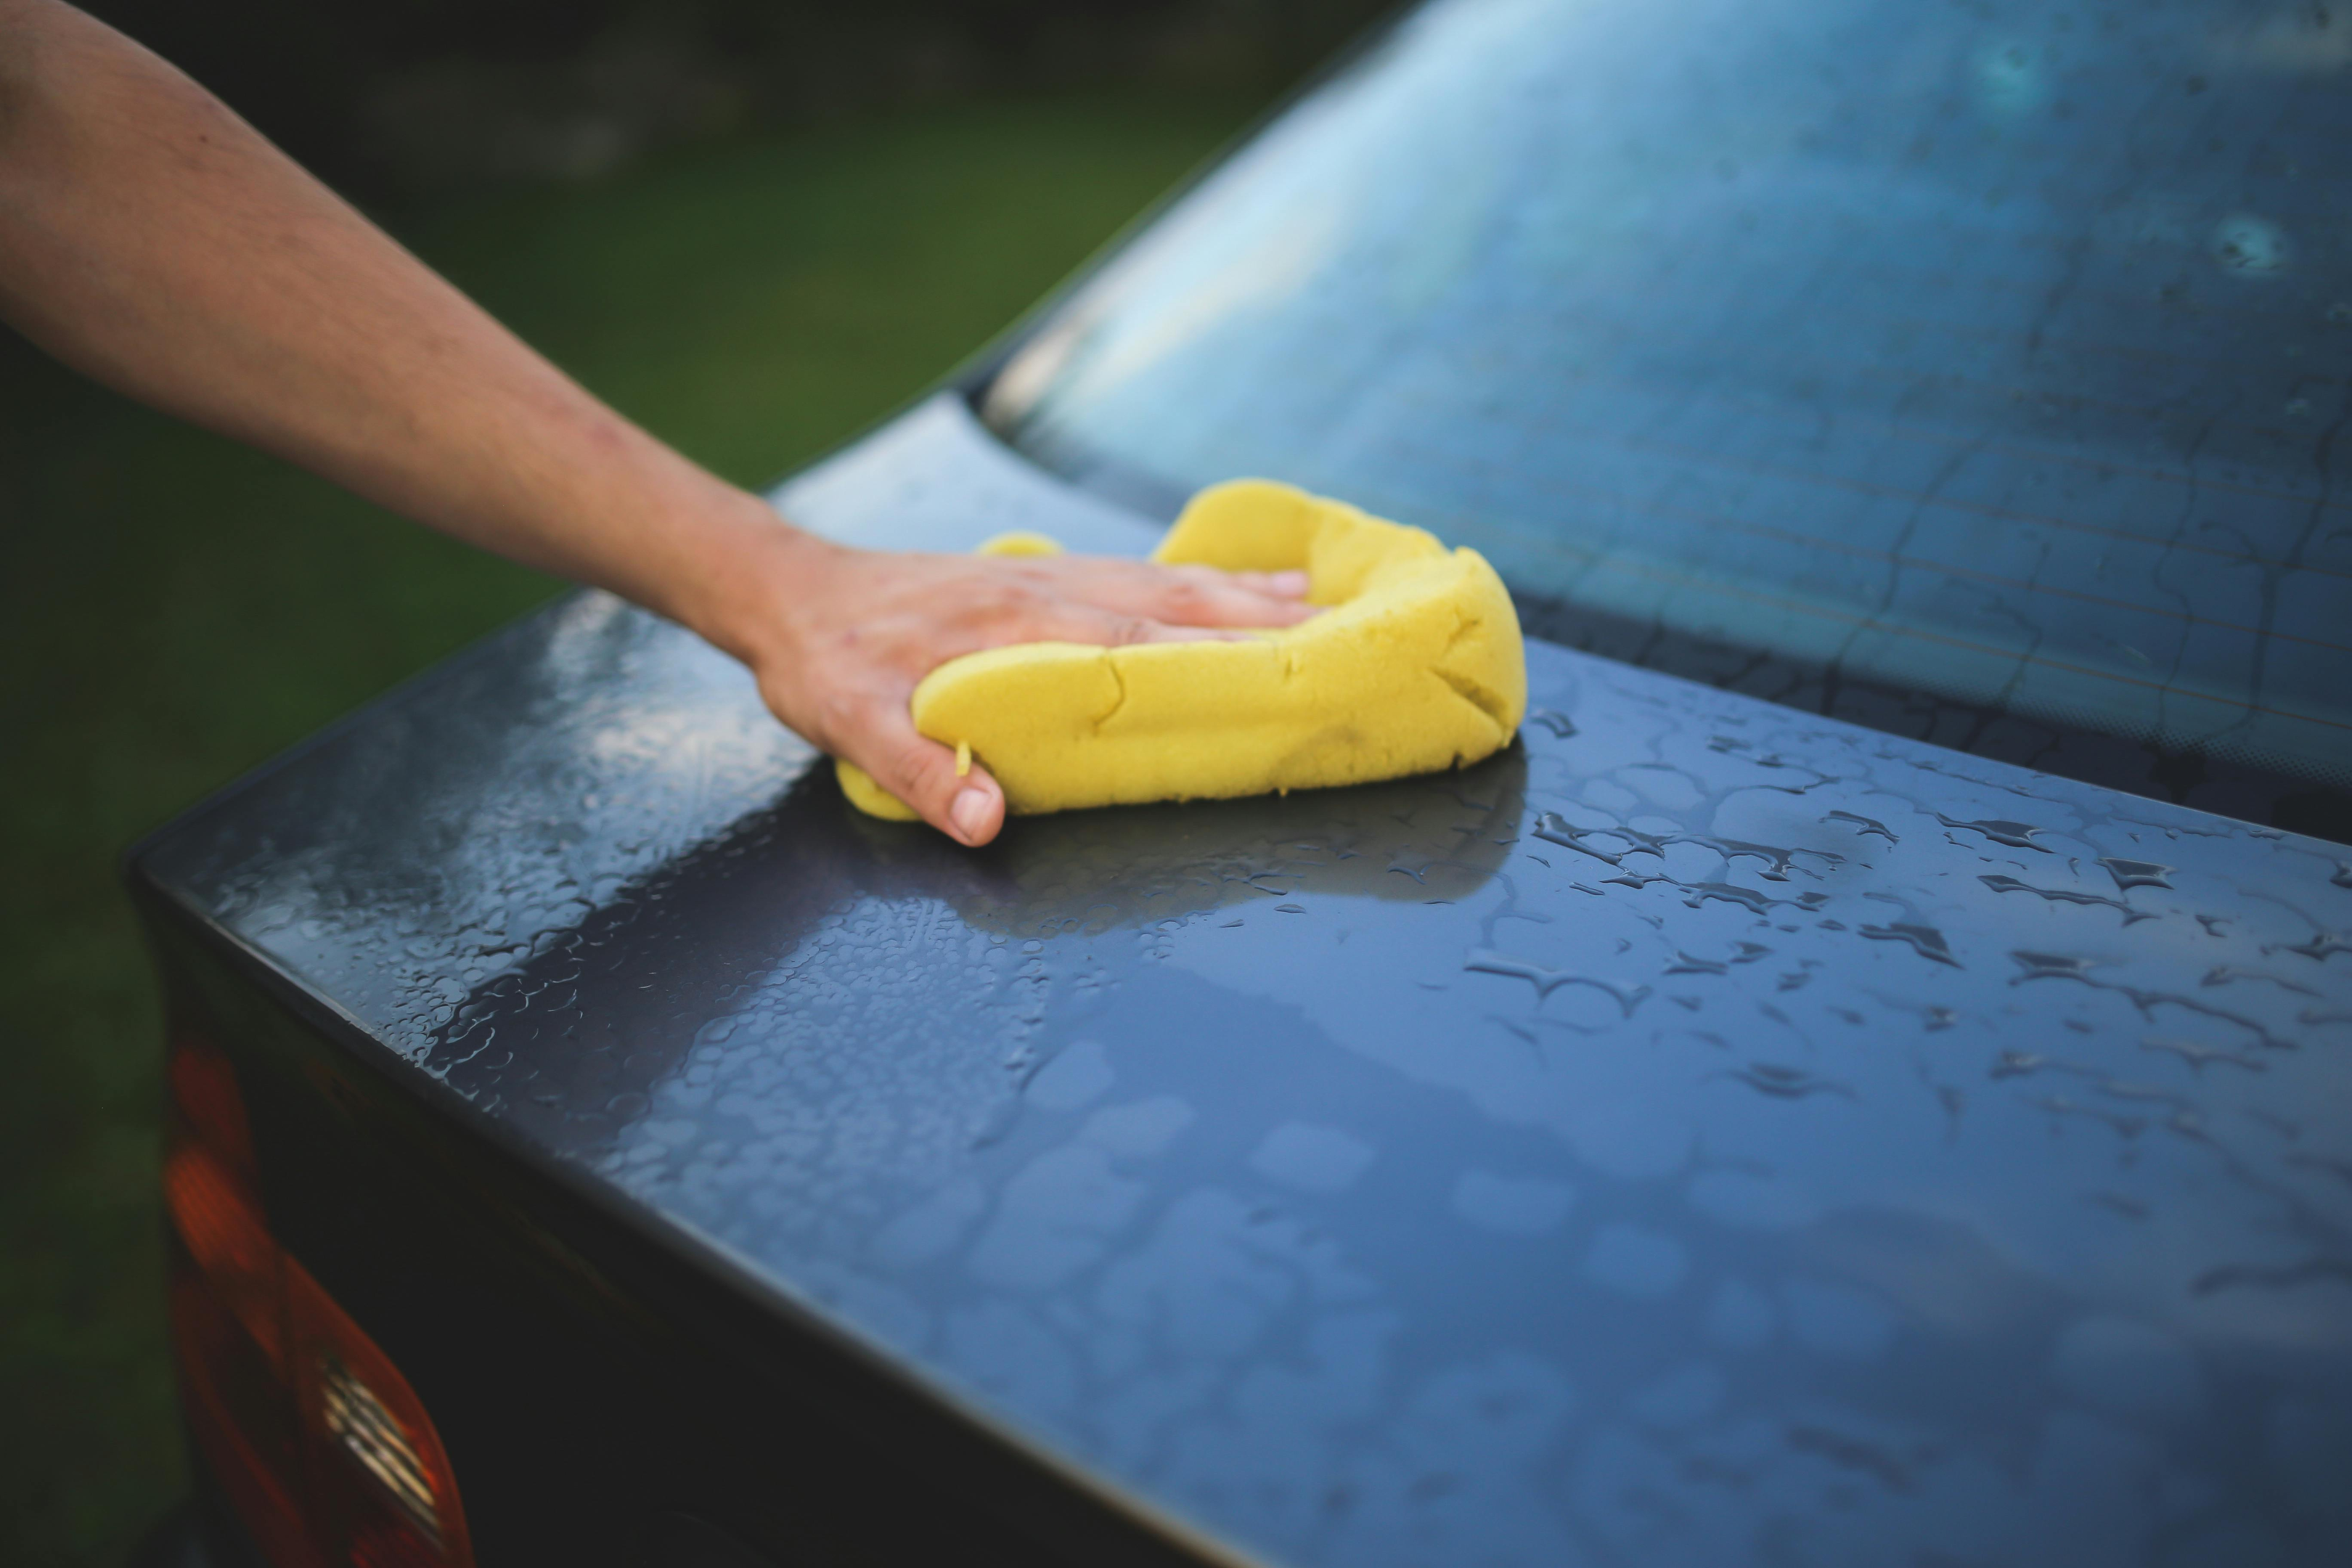 Hand shown washing trunk of black car with yellow rag